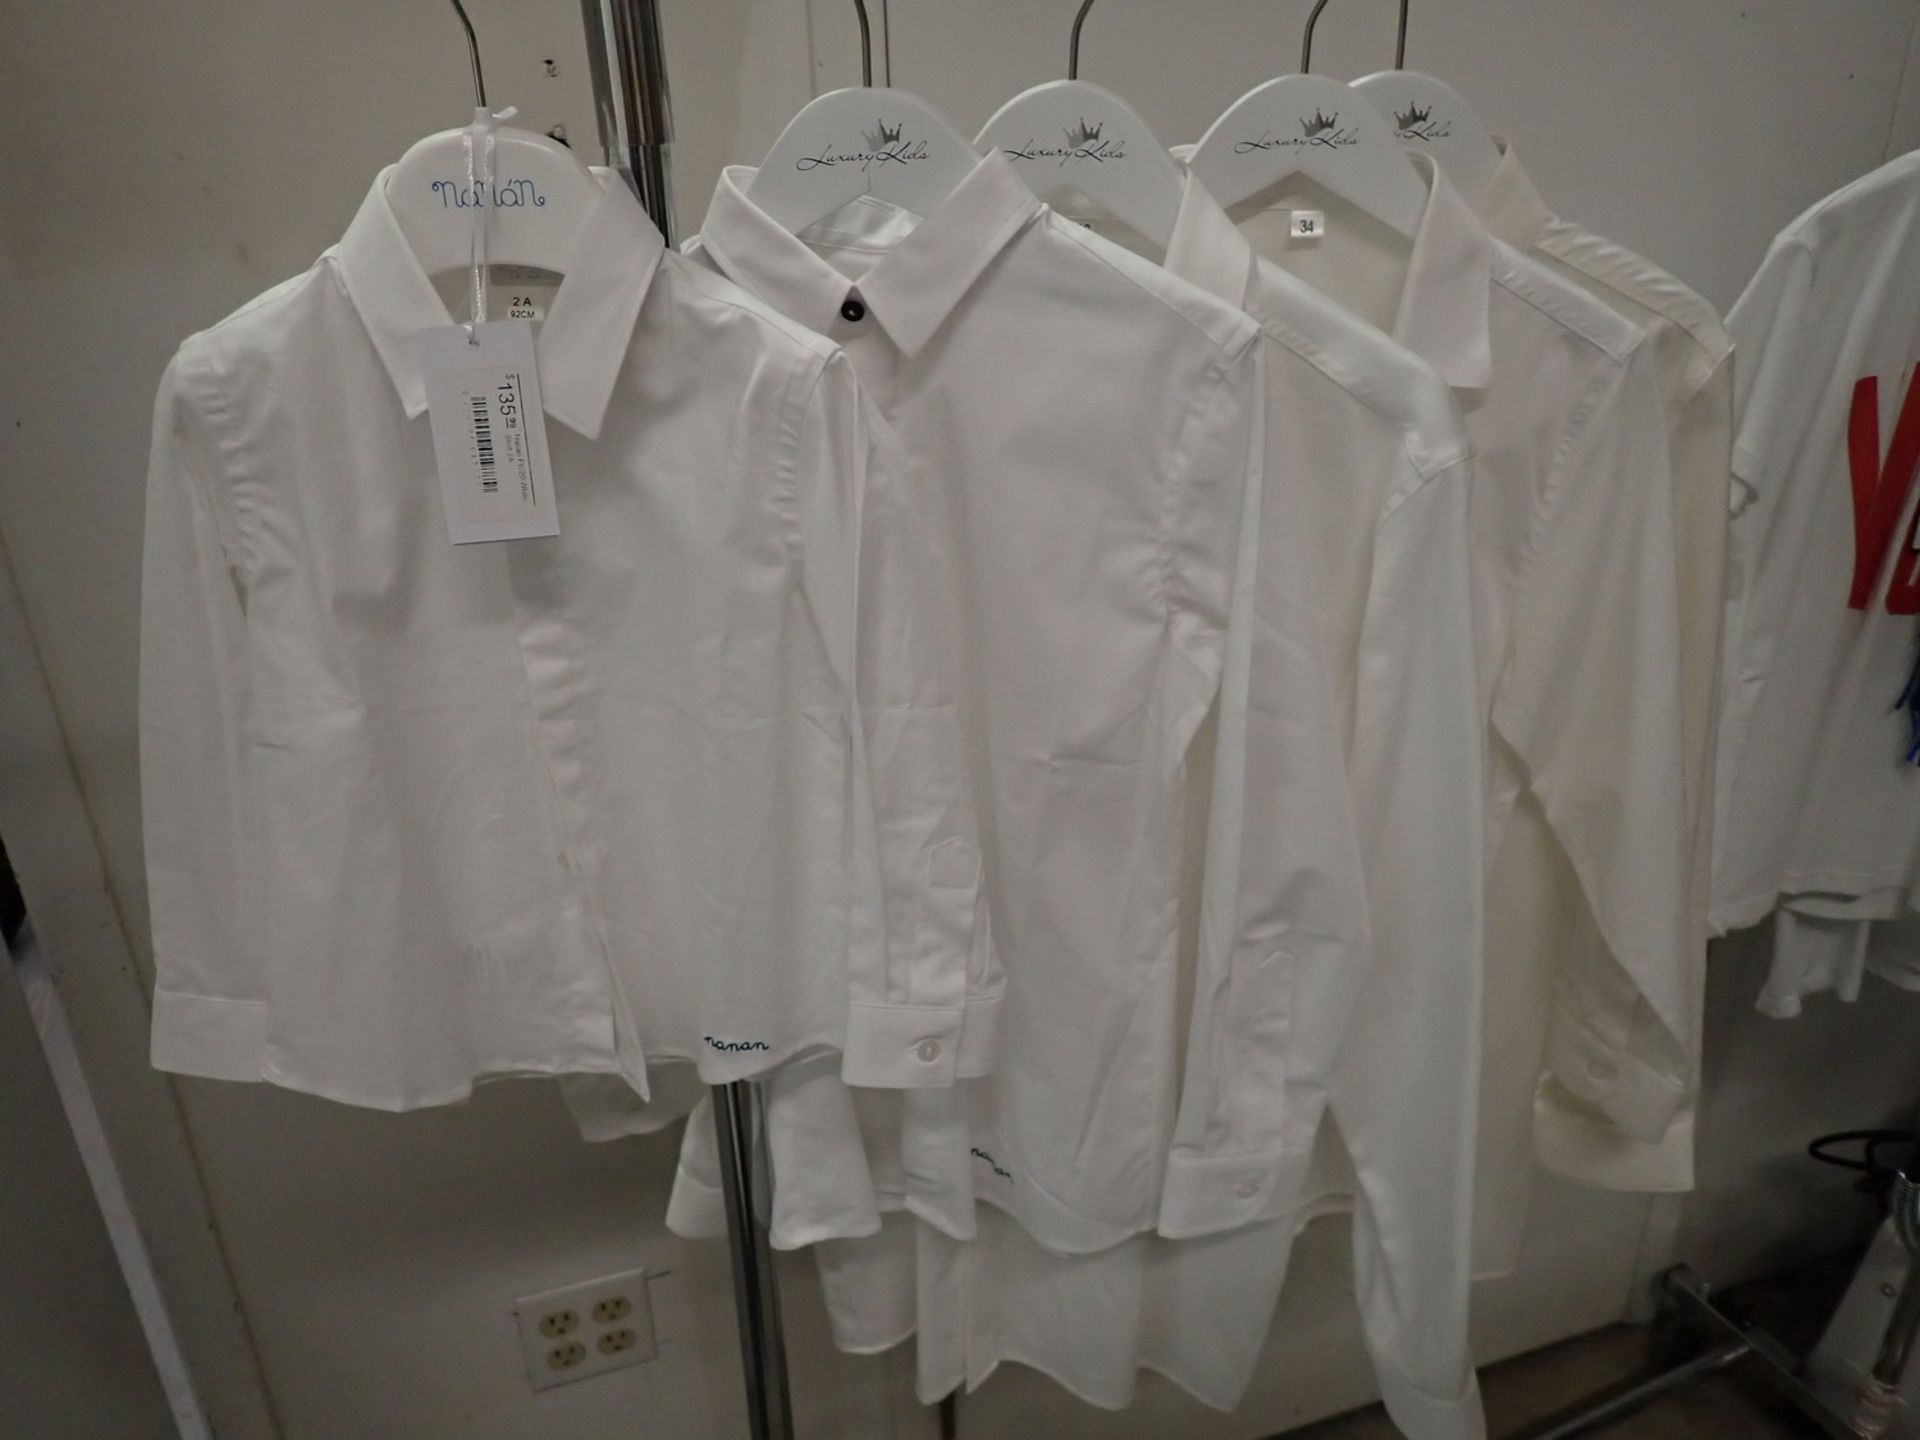 UNITS - ASSORTED BOYS SUITS, DRESS SHIRTS, TOPS, & PANTS FROM MSGM, NANAN, ZINGONE, ALESSANDRINI, - Image 3 of 14